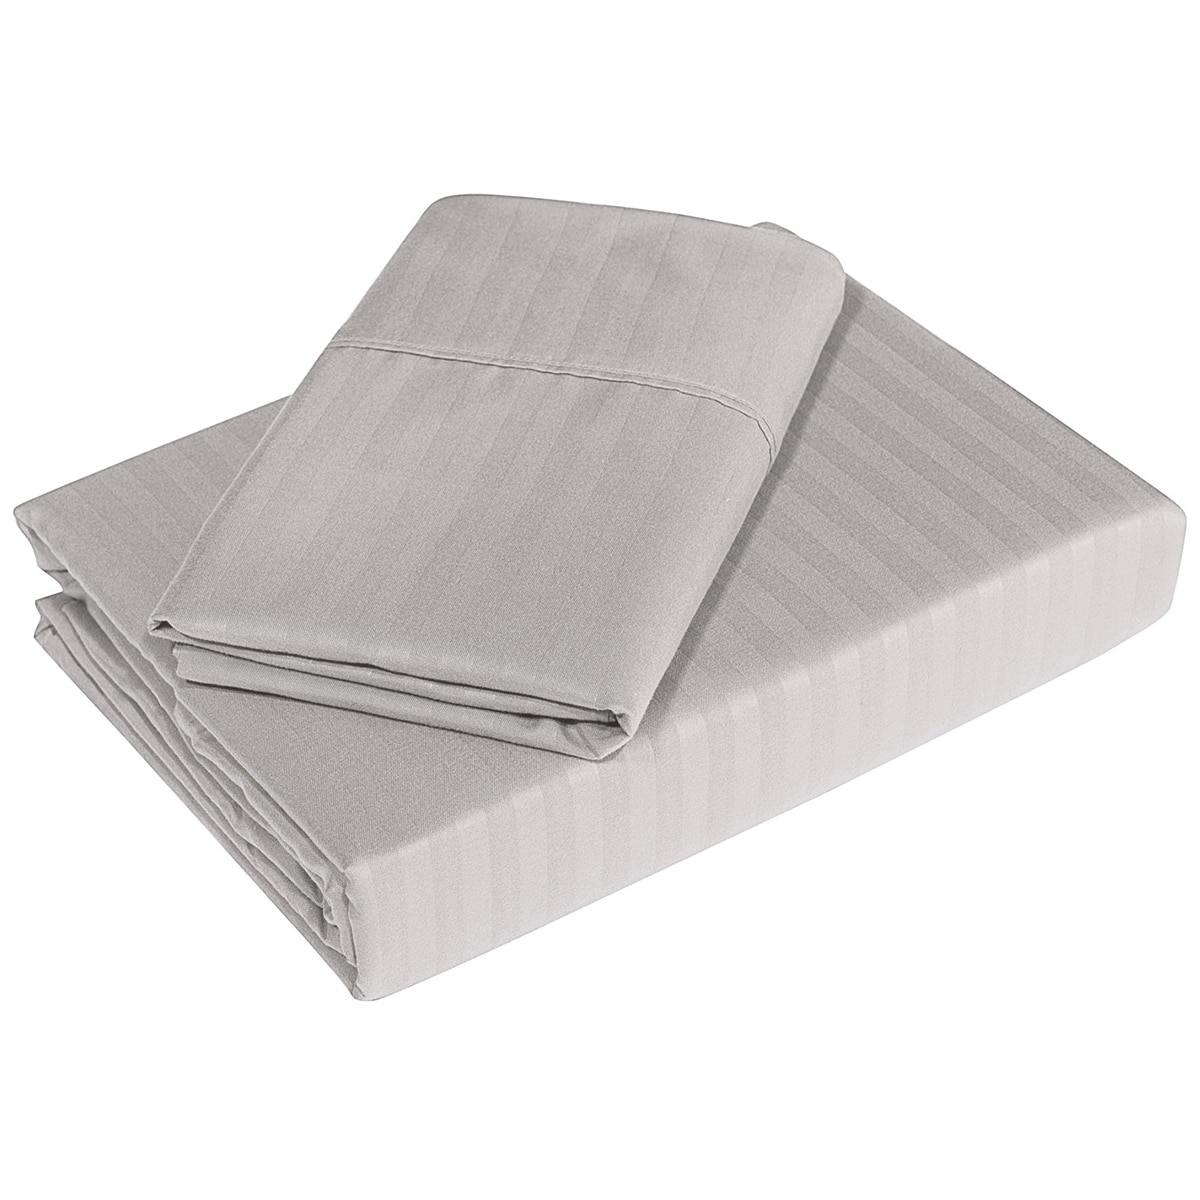 Bdirect Royal Comfort Blended Bamboo Sheet Set with stripes Queen - Silver Grey